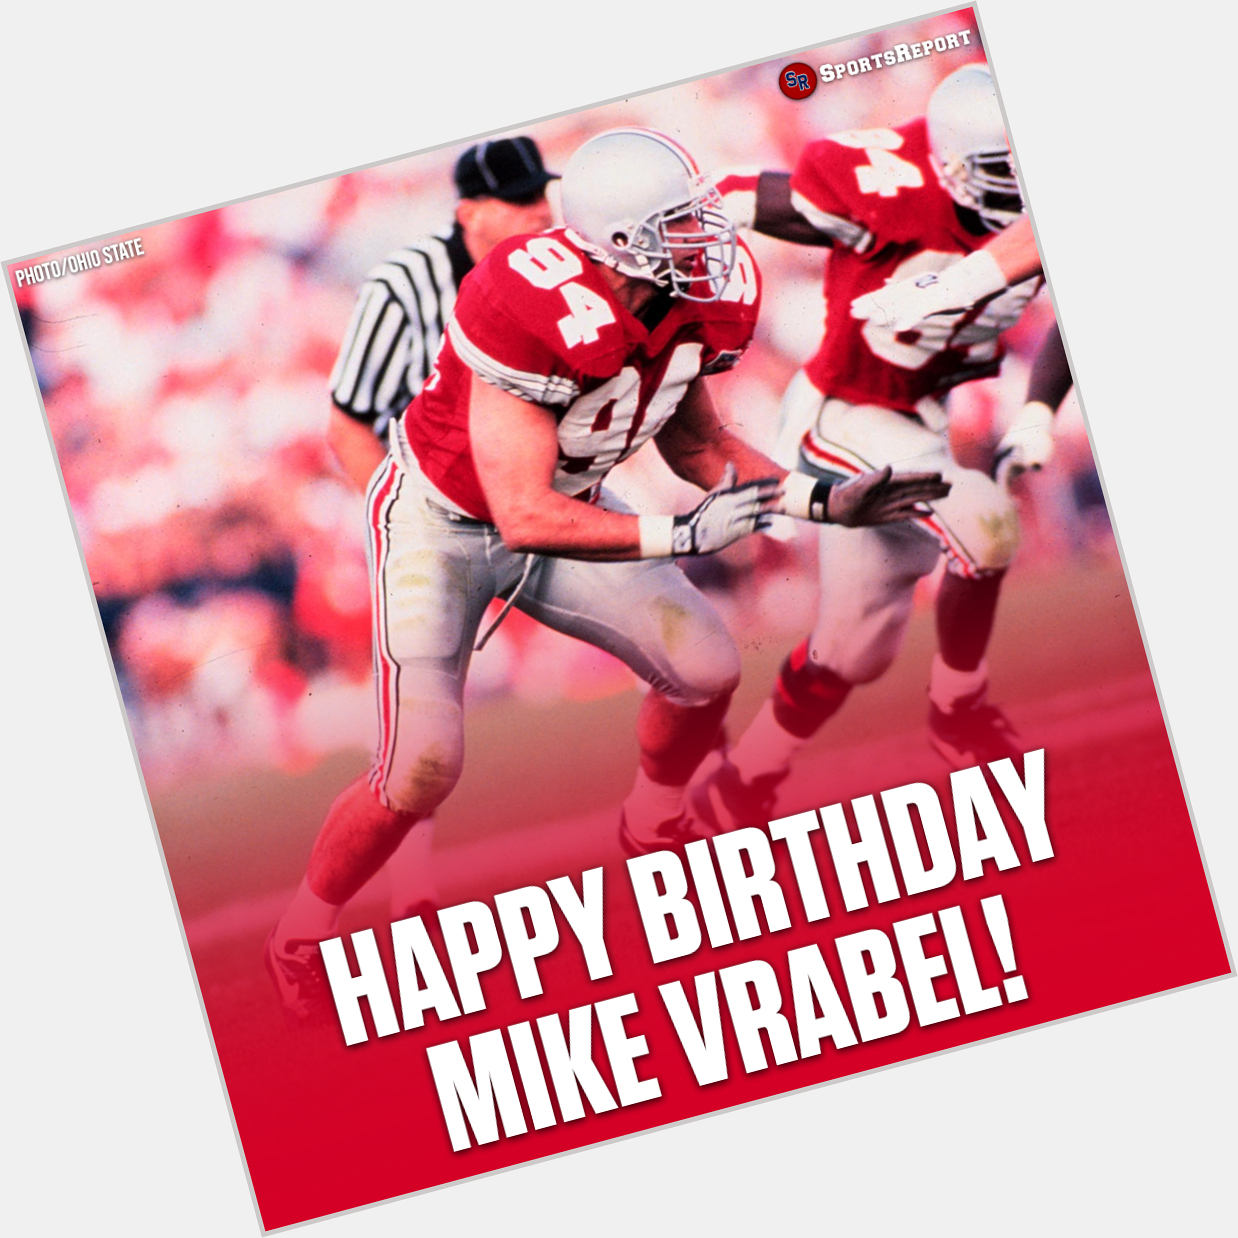 Happy Birthday to great, Mike Vrabel!  